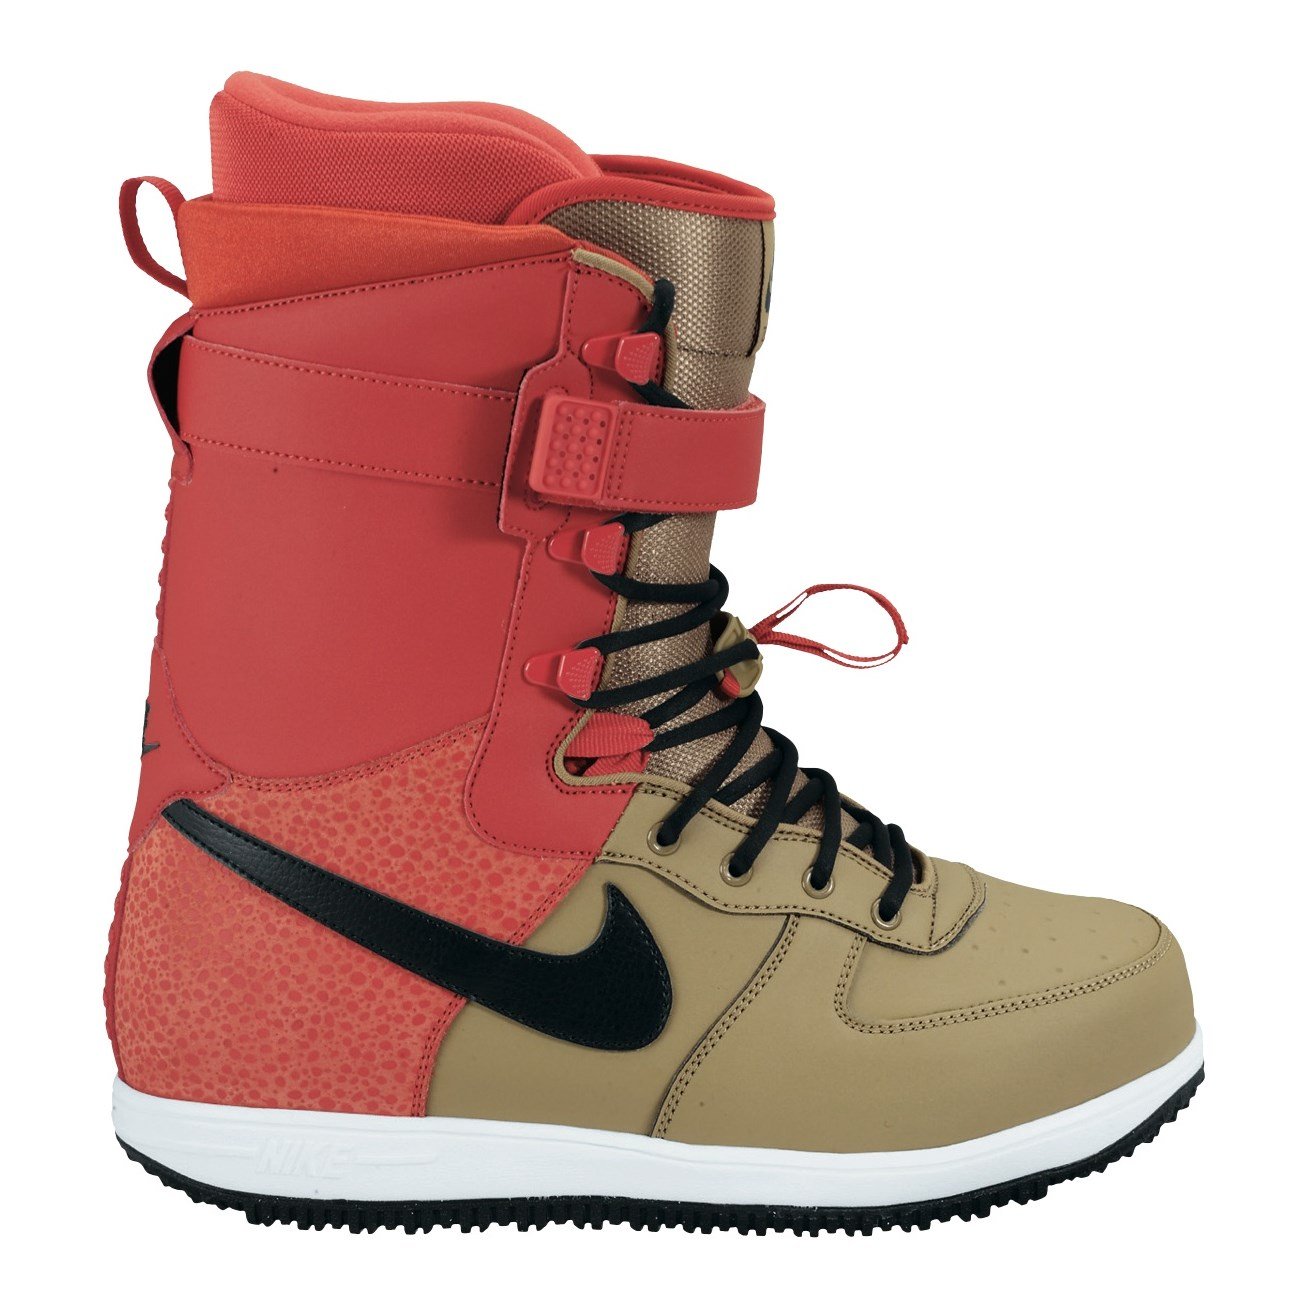 Nike Zoom Force 1 Snowboard Boots 2013 